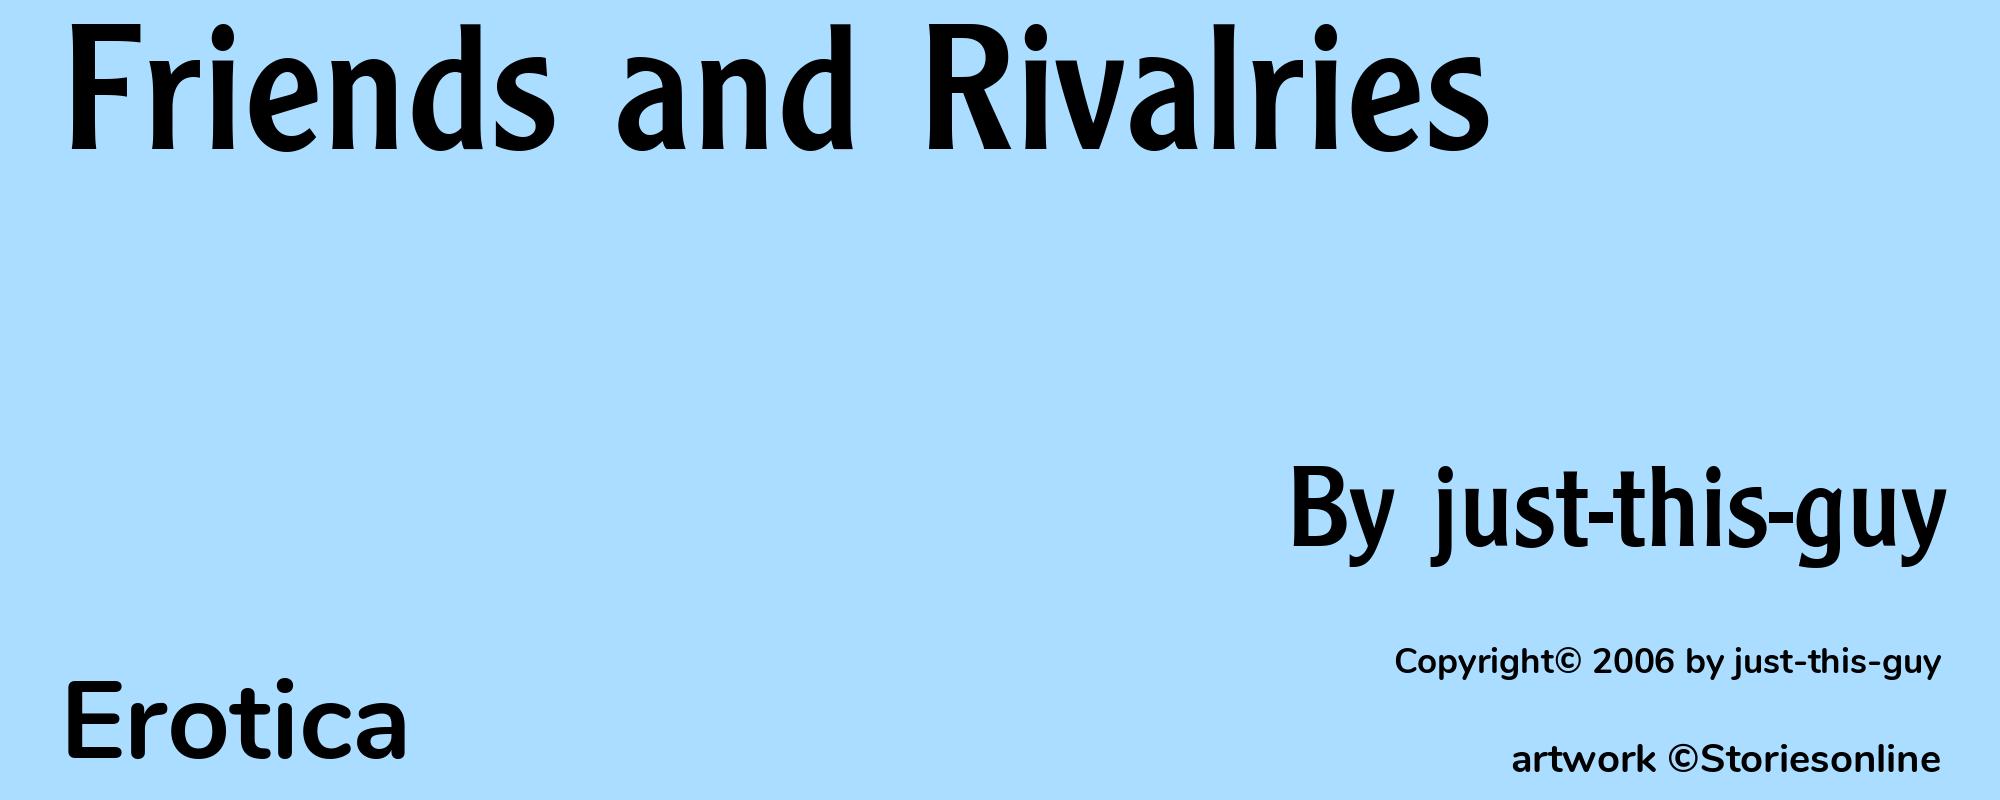 Friends and Rivalries - Cover